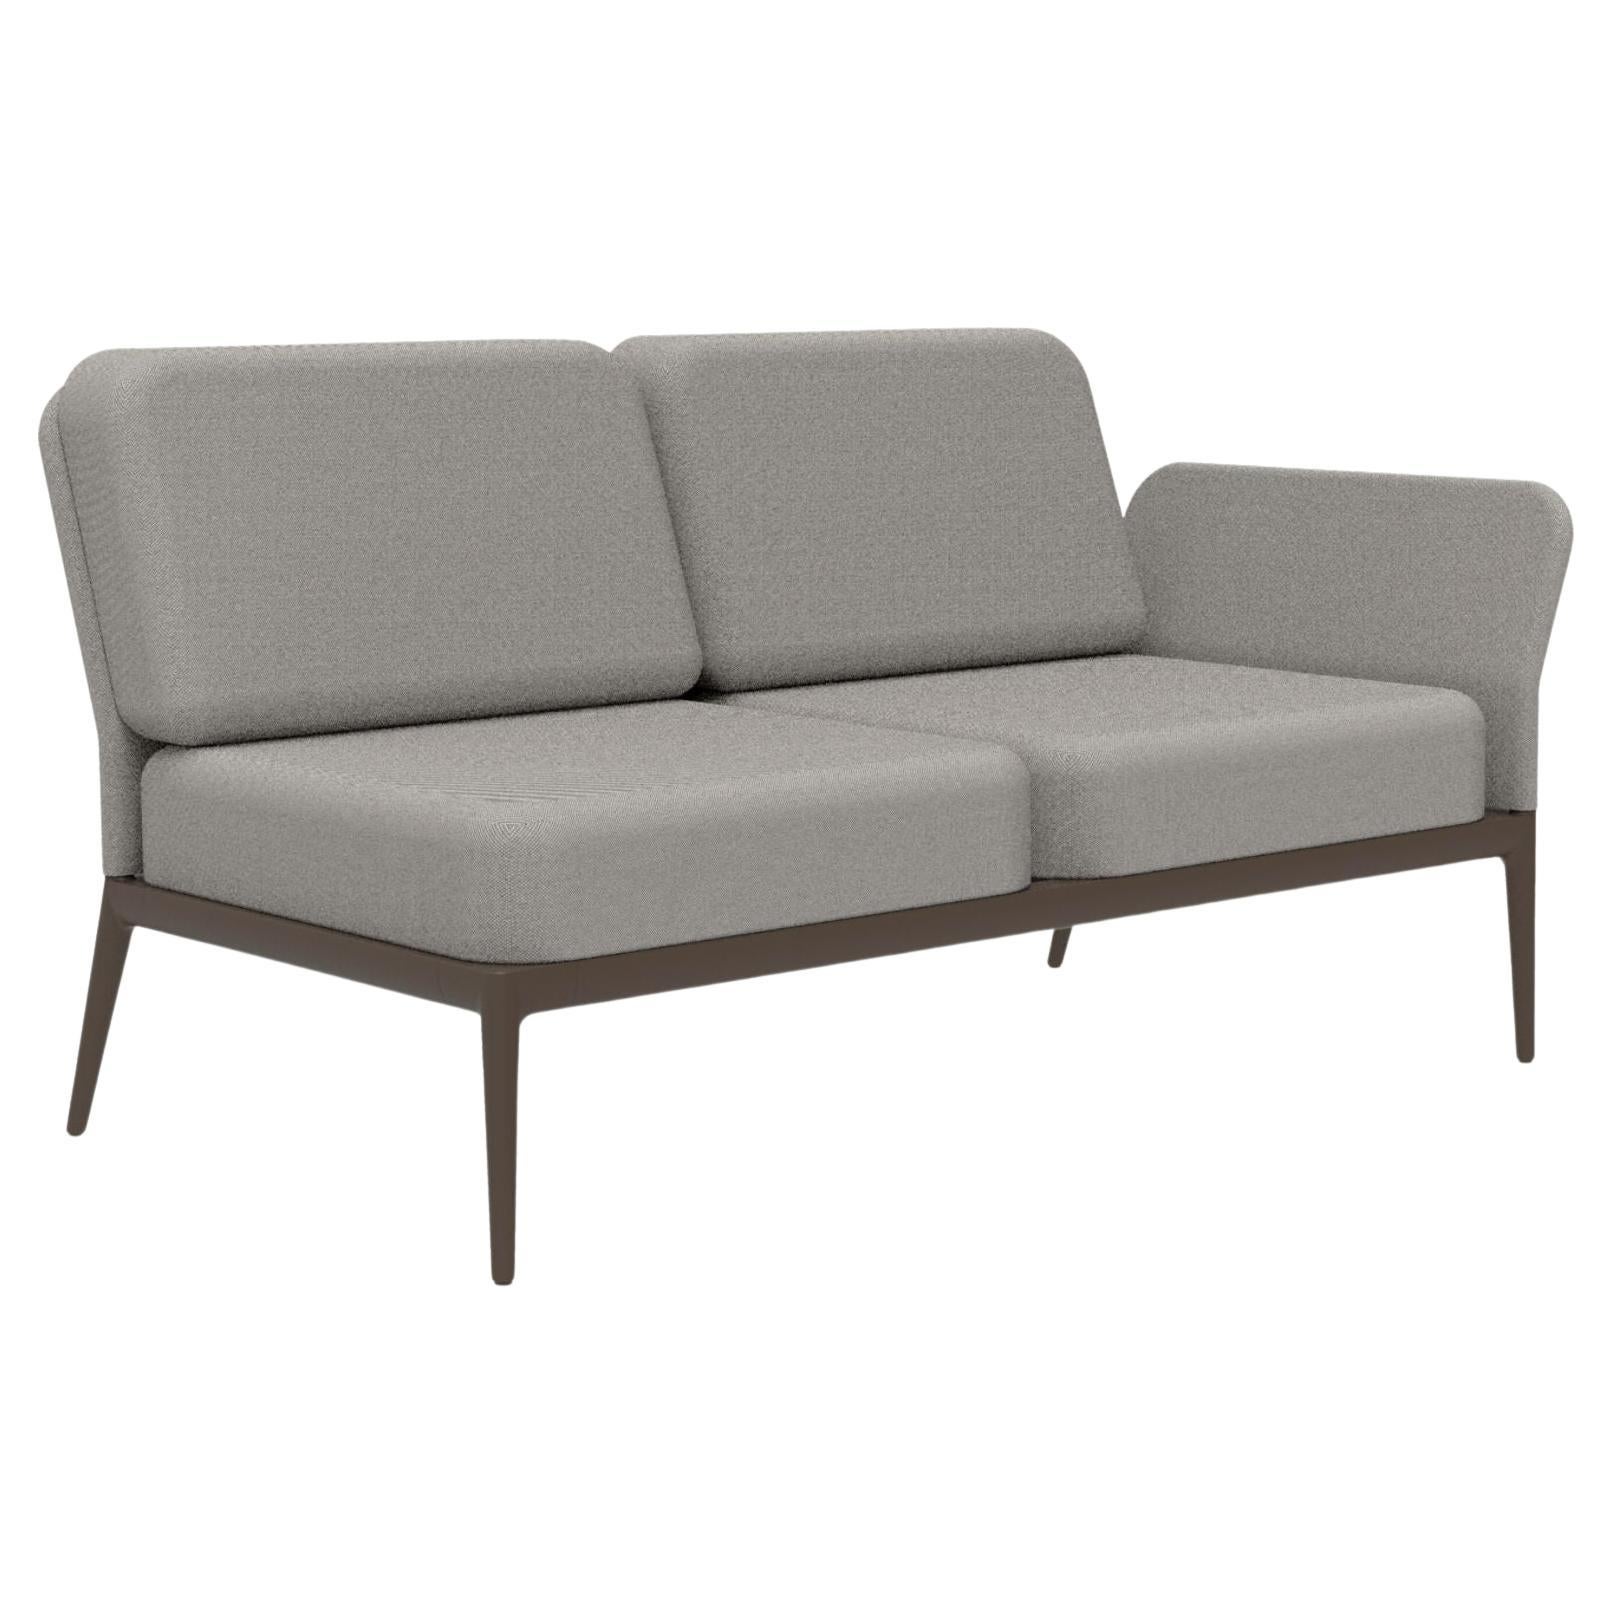 Cover Bronze Double Left Modular Sofa by MOWEE